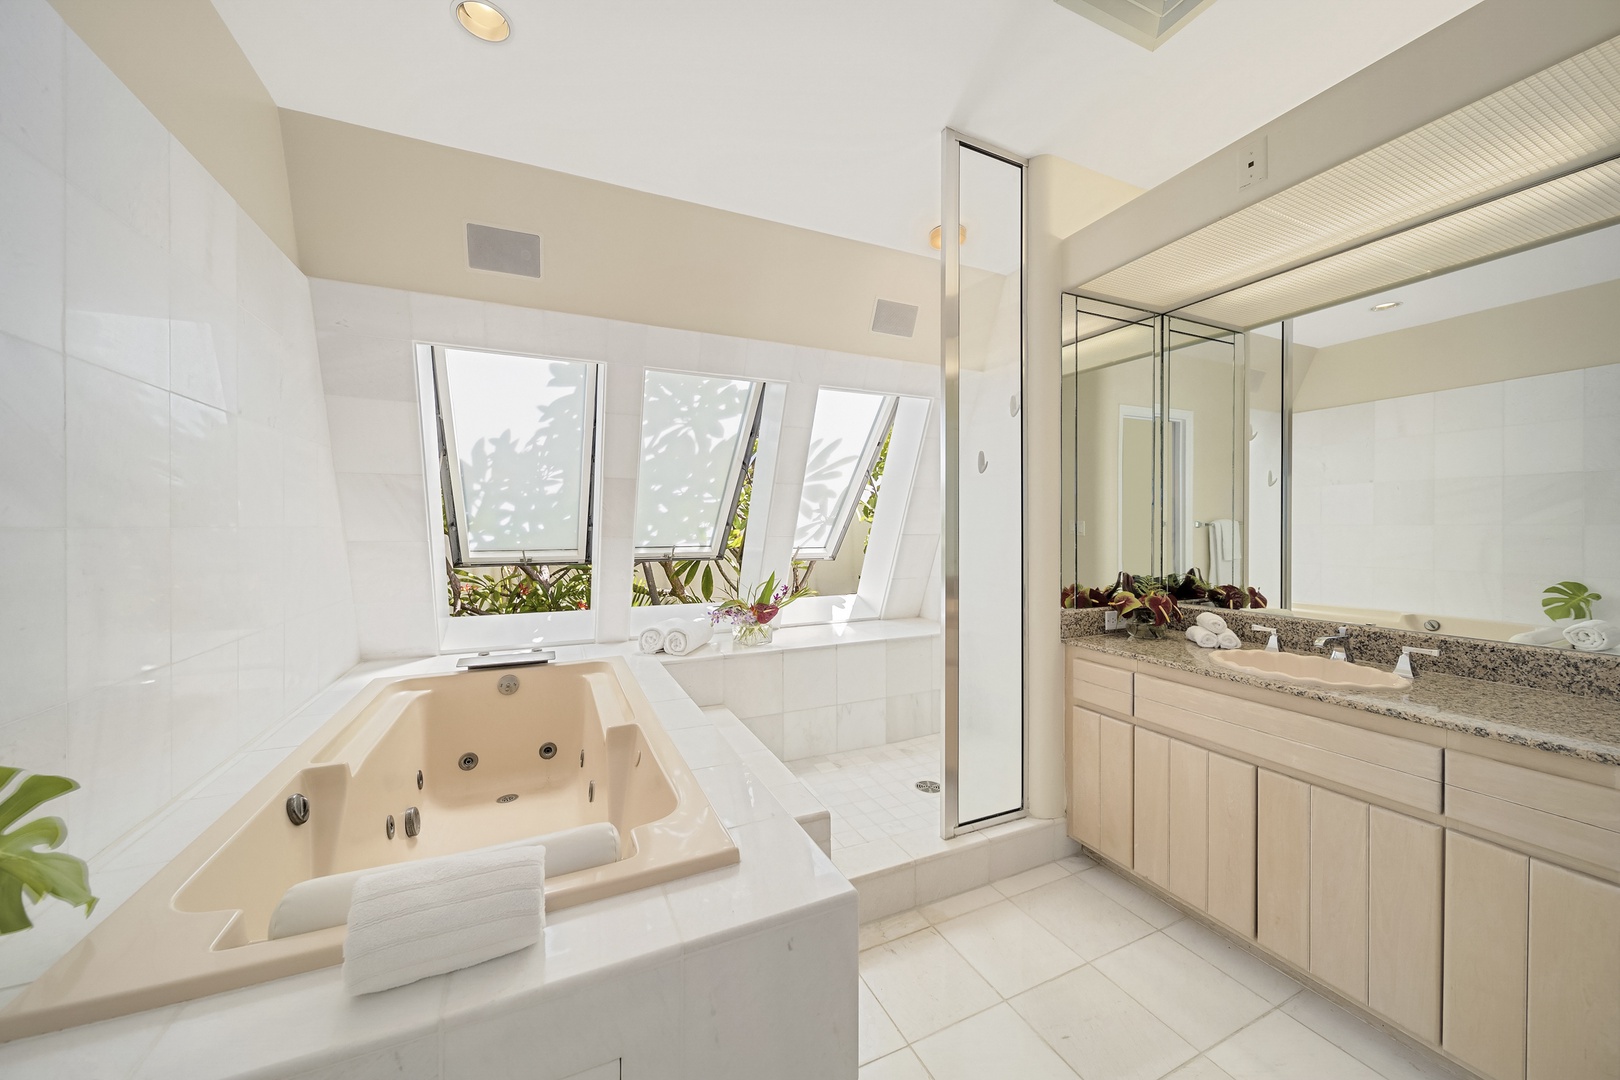 Honolulu Vacation Rentals, Diamond Head Surf House - Primary bathroom with jetted tub and walk-in shower.